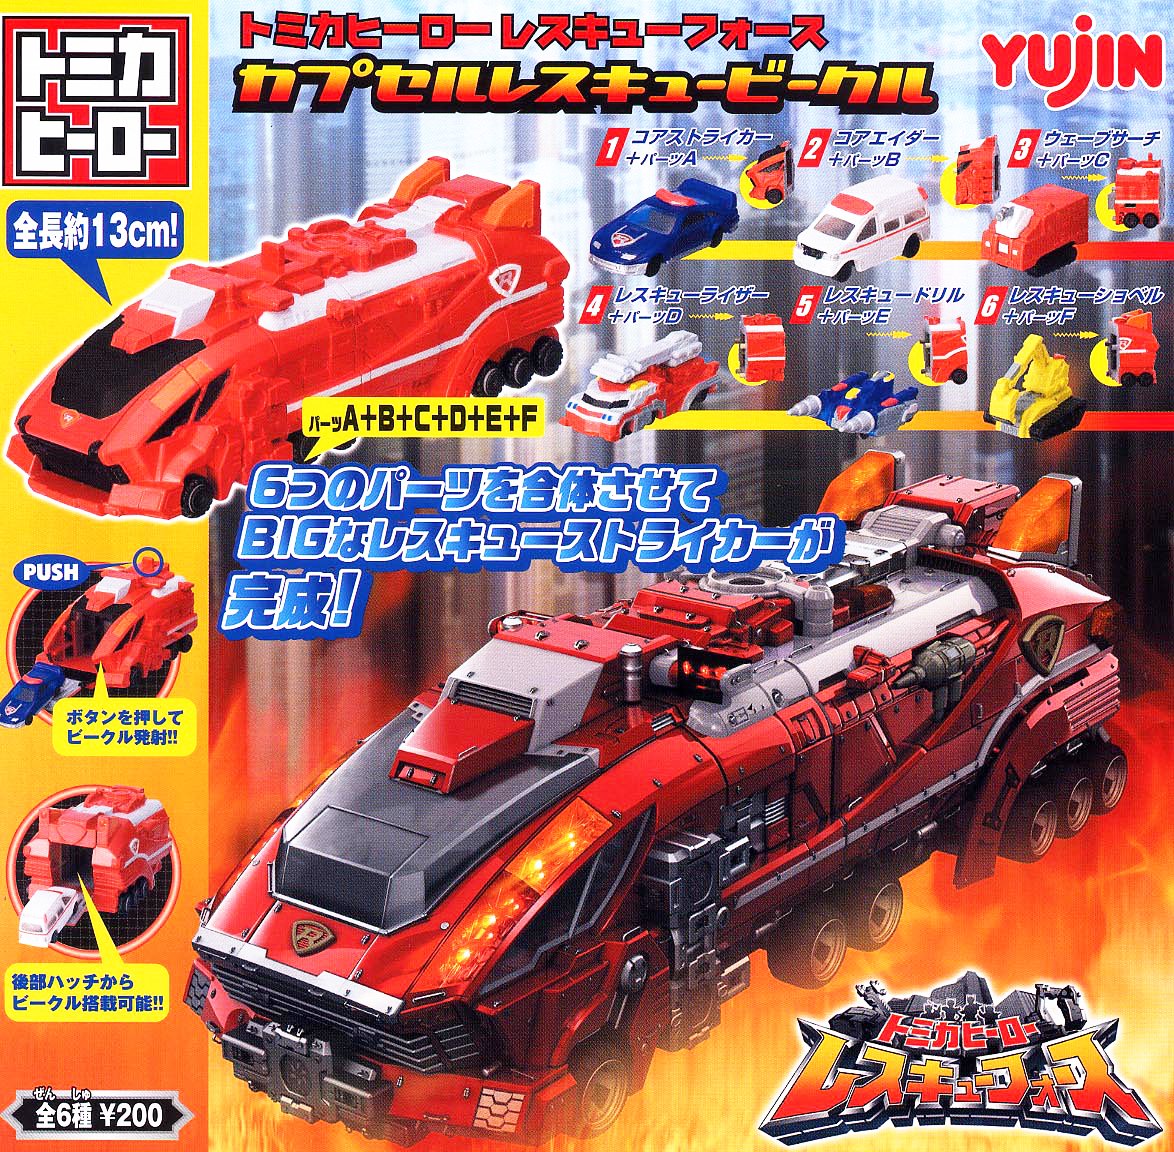 Tomica Hero Rescue Force Capsule Rescue Vehicles | Tomica Wiki 